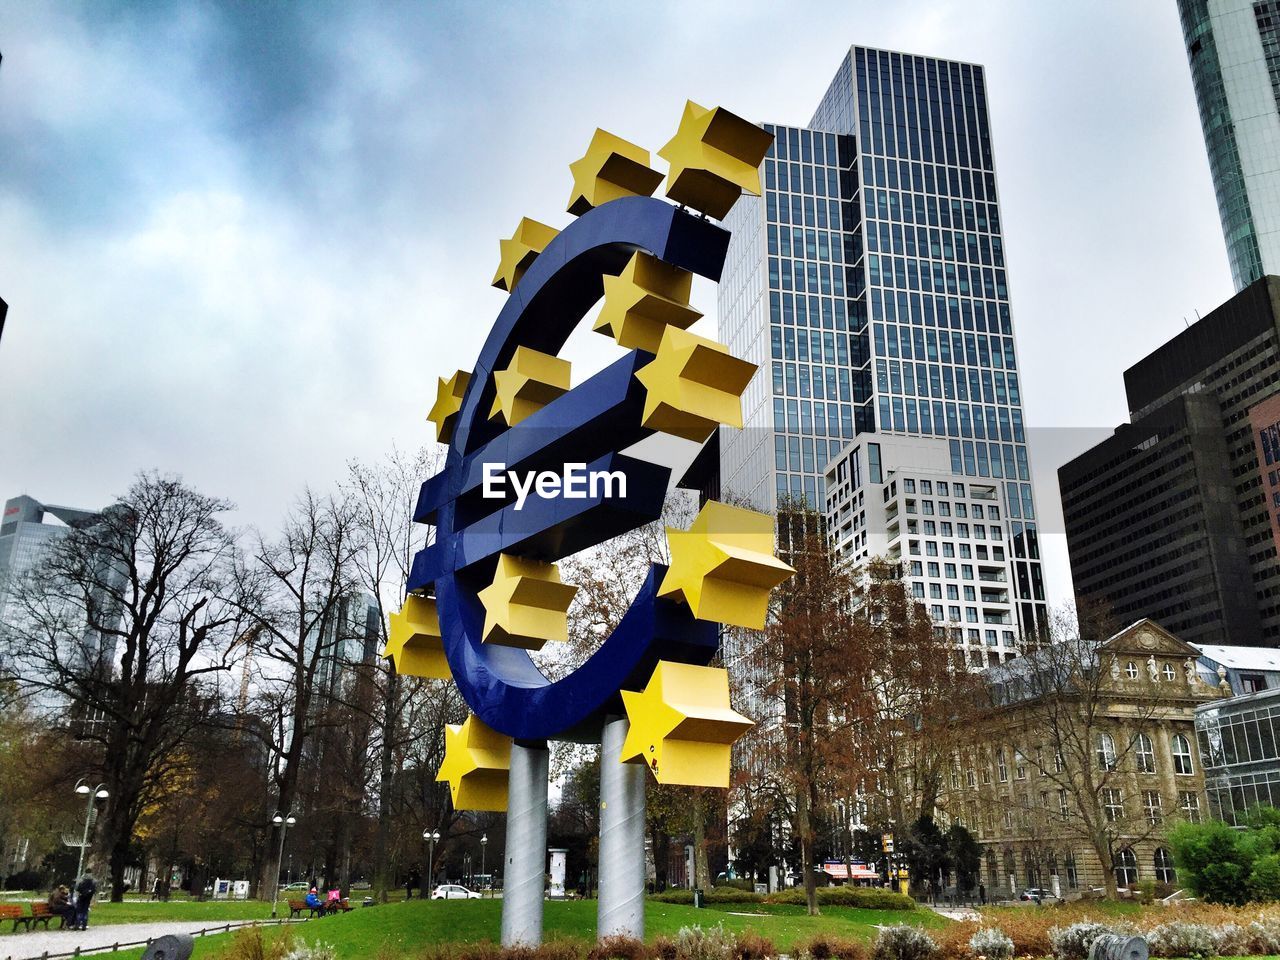 European central bank symbol by buildings against sky